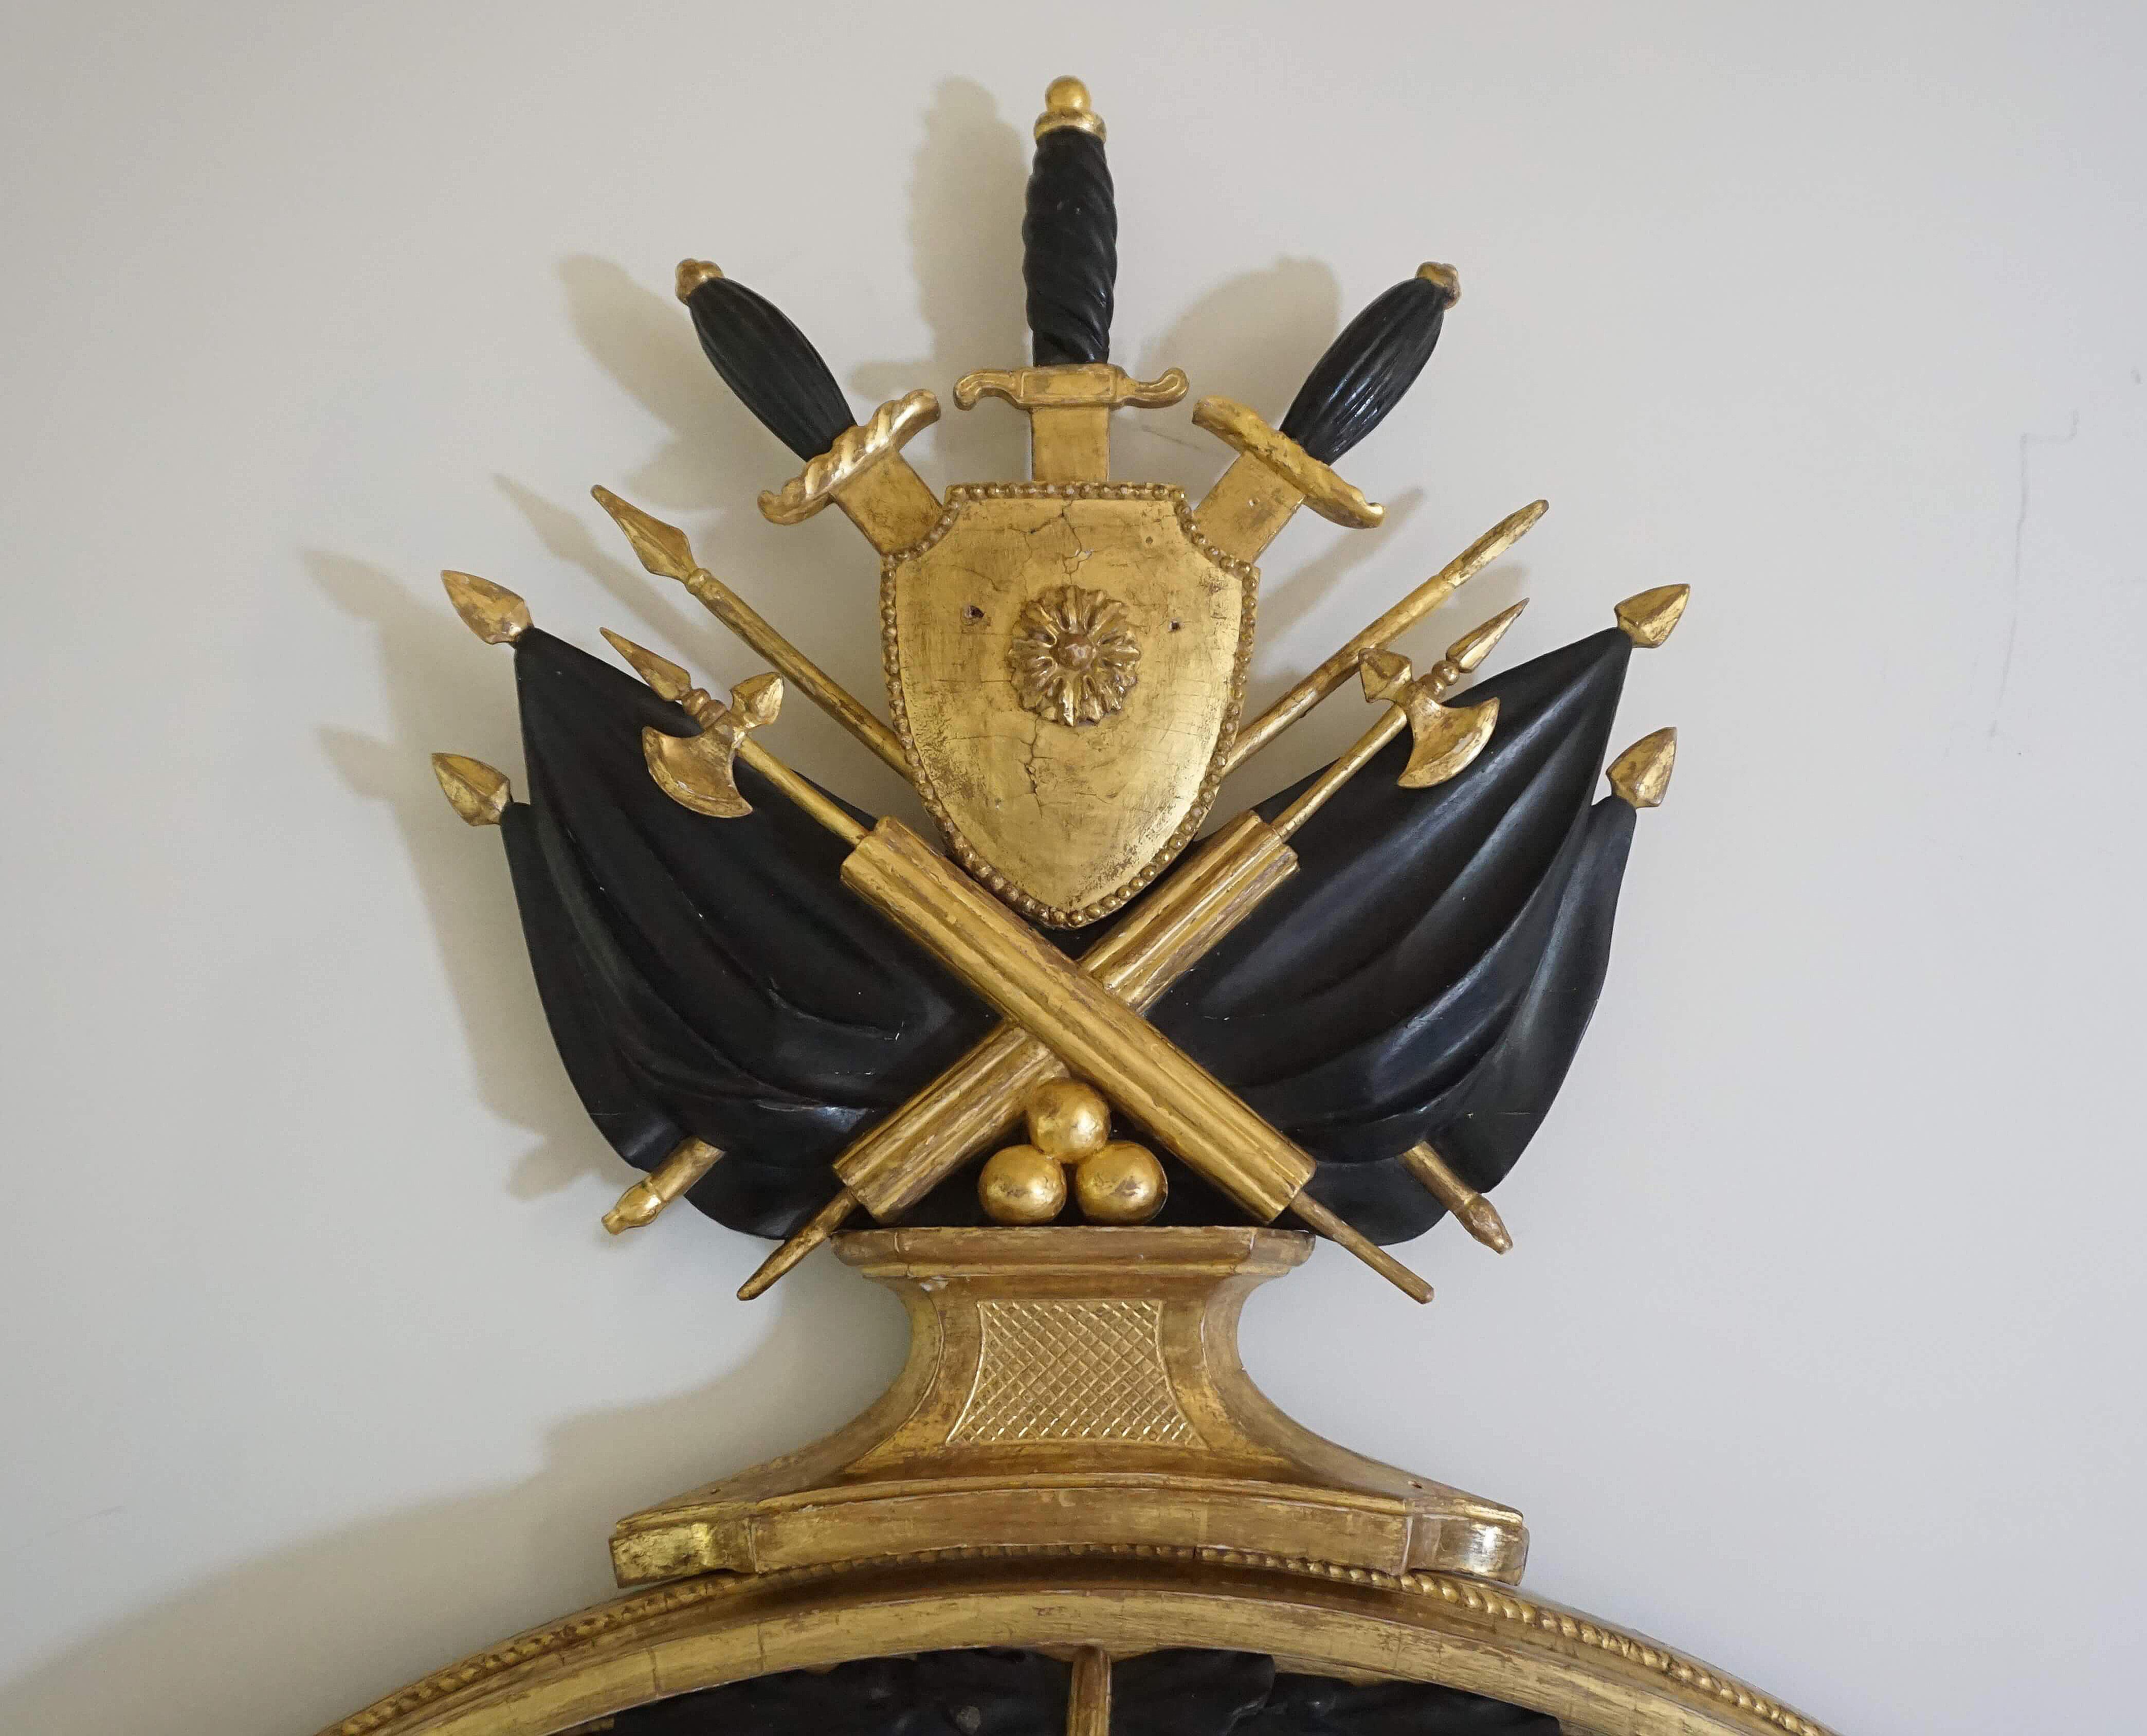 English regency period, possibly Irish, neoclassical style convex mirror of good size having giltwood and ebonized frame; the elaborate cresting with ancient Roman Army iconography of ebonized handled swords behind gilt shield above crossed fasces